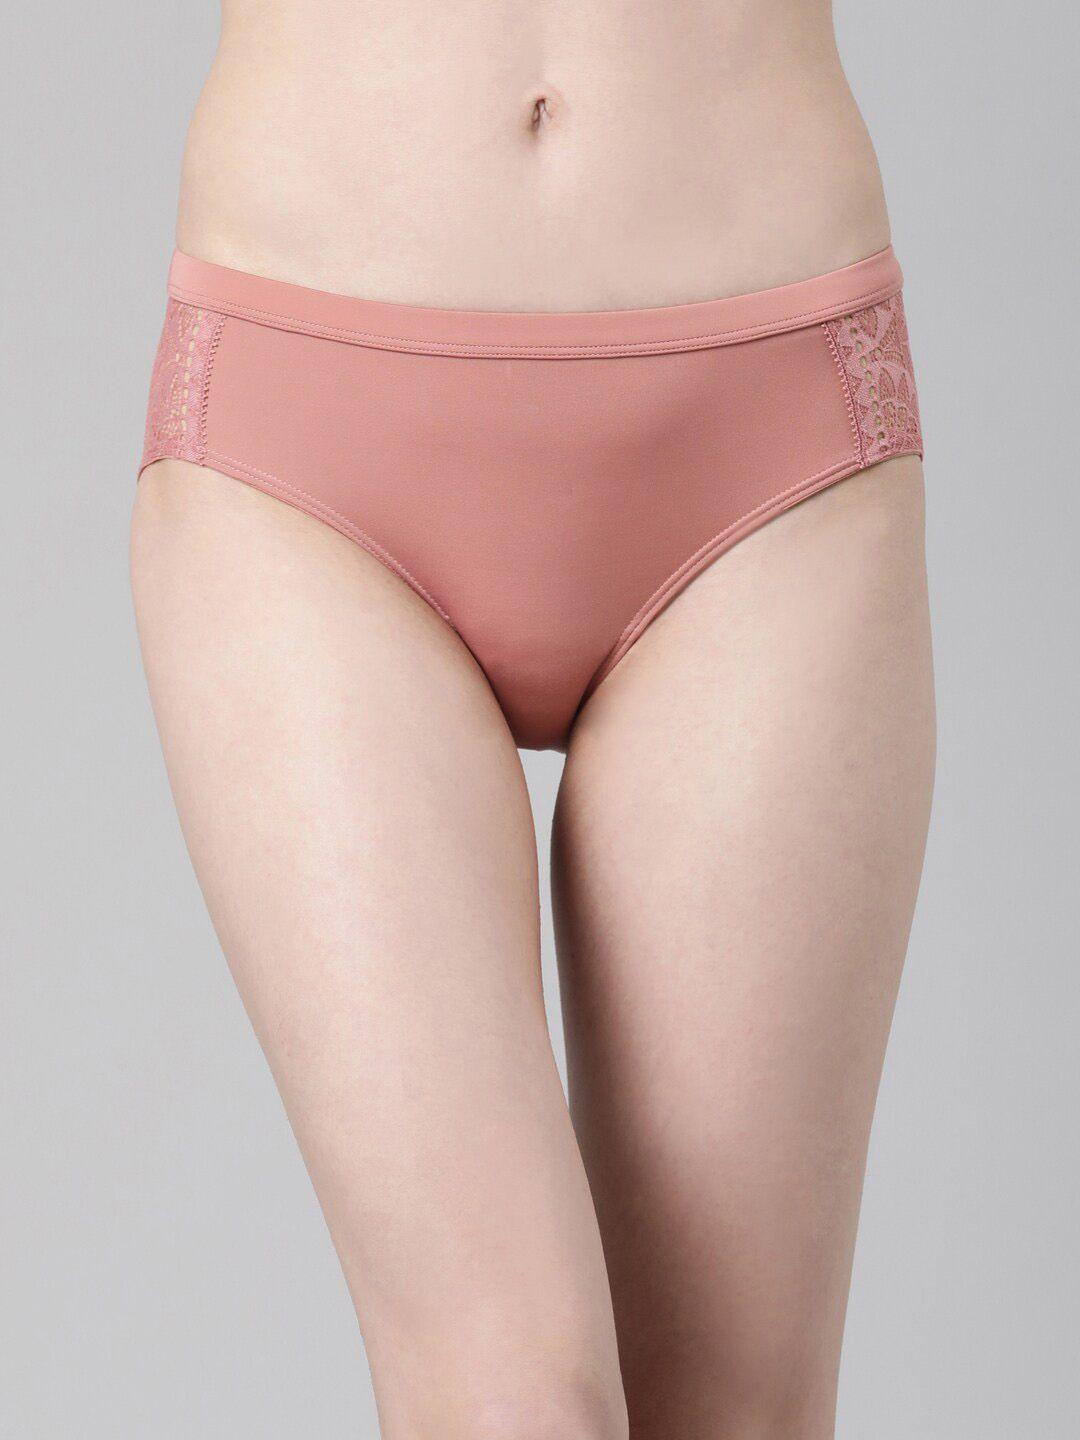 enamor-women-mid-rise-lace-detail-flat-elasticated-hipster-briefs-p118